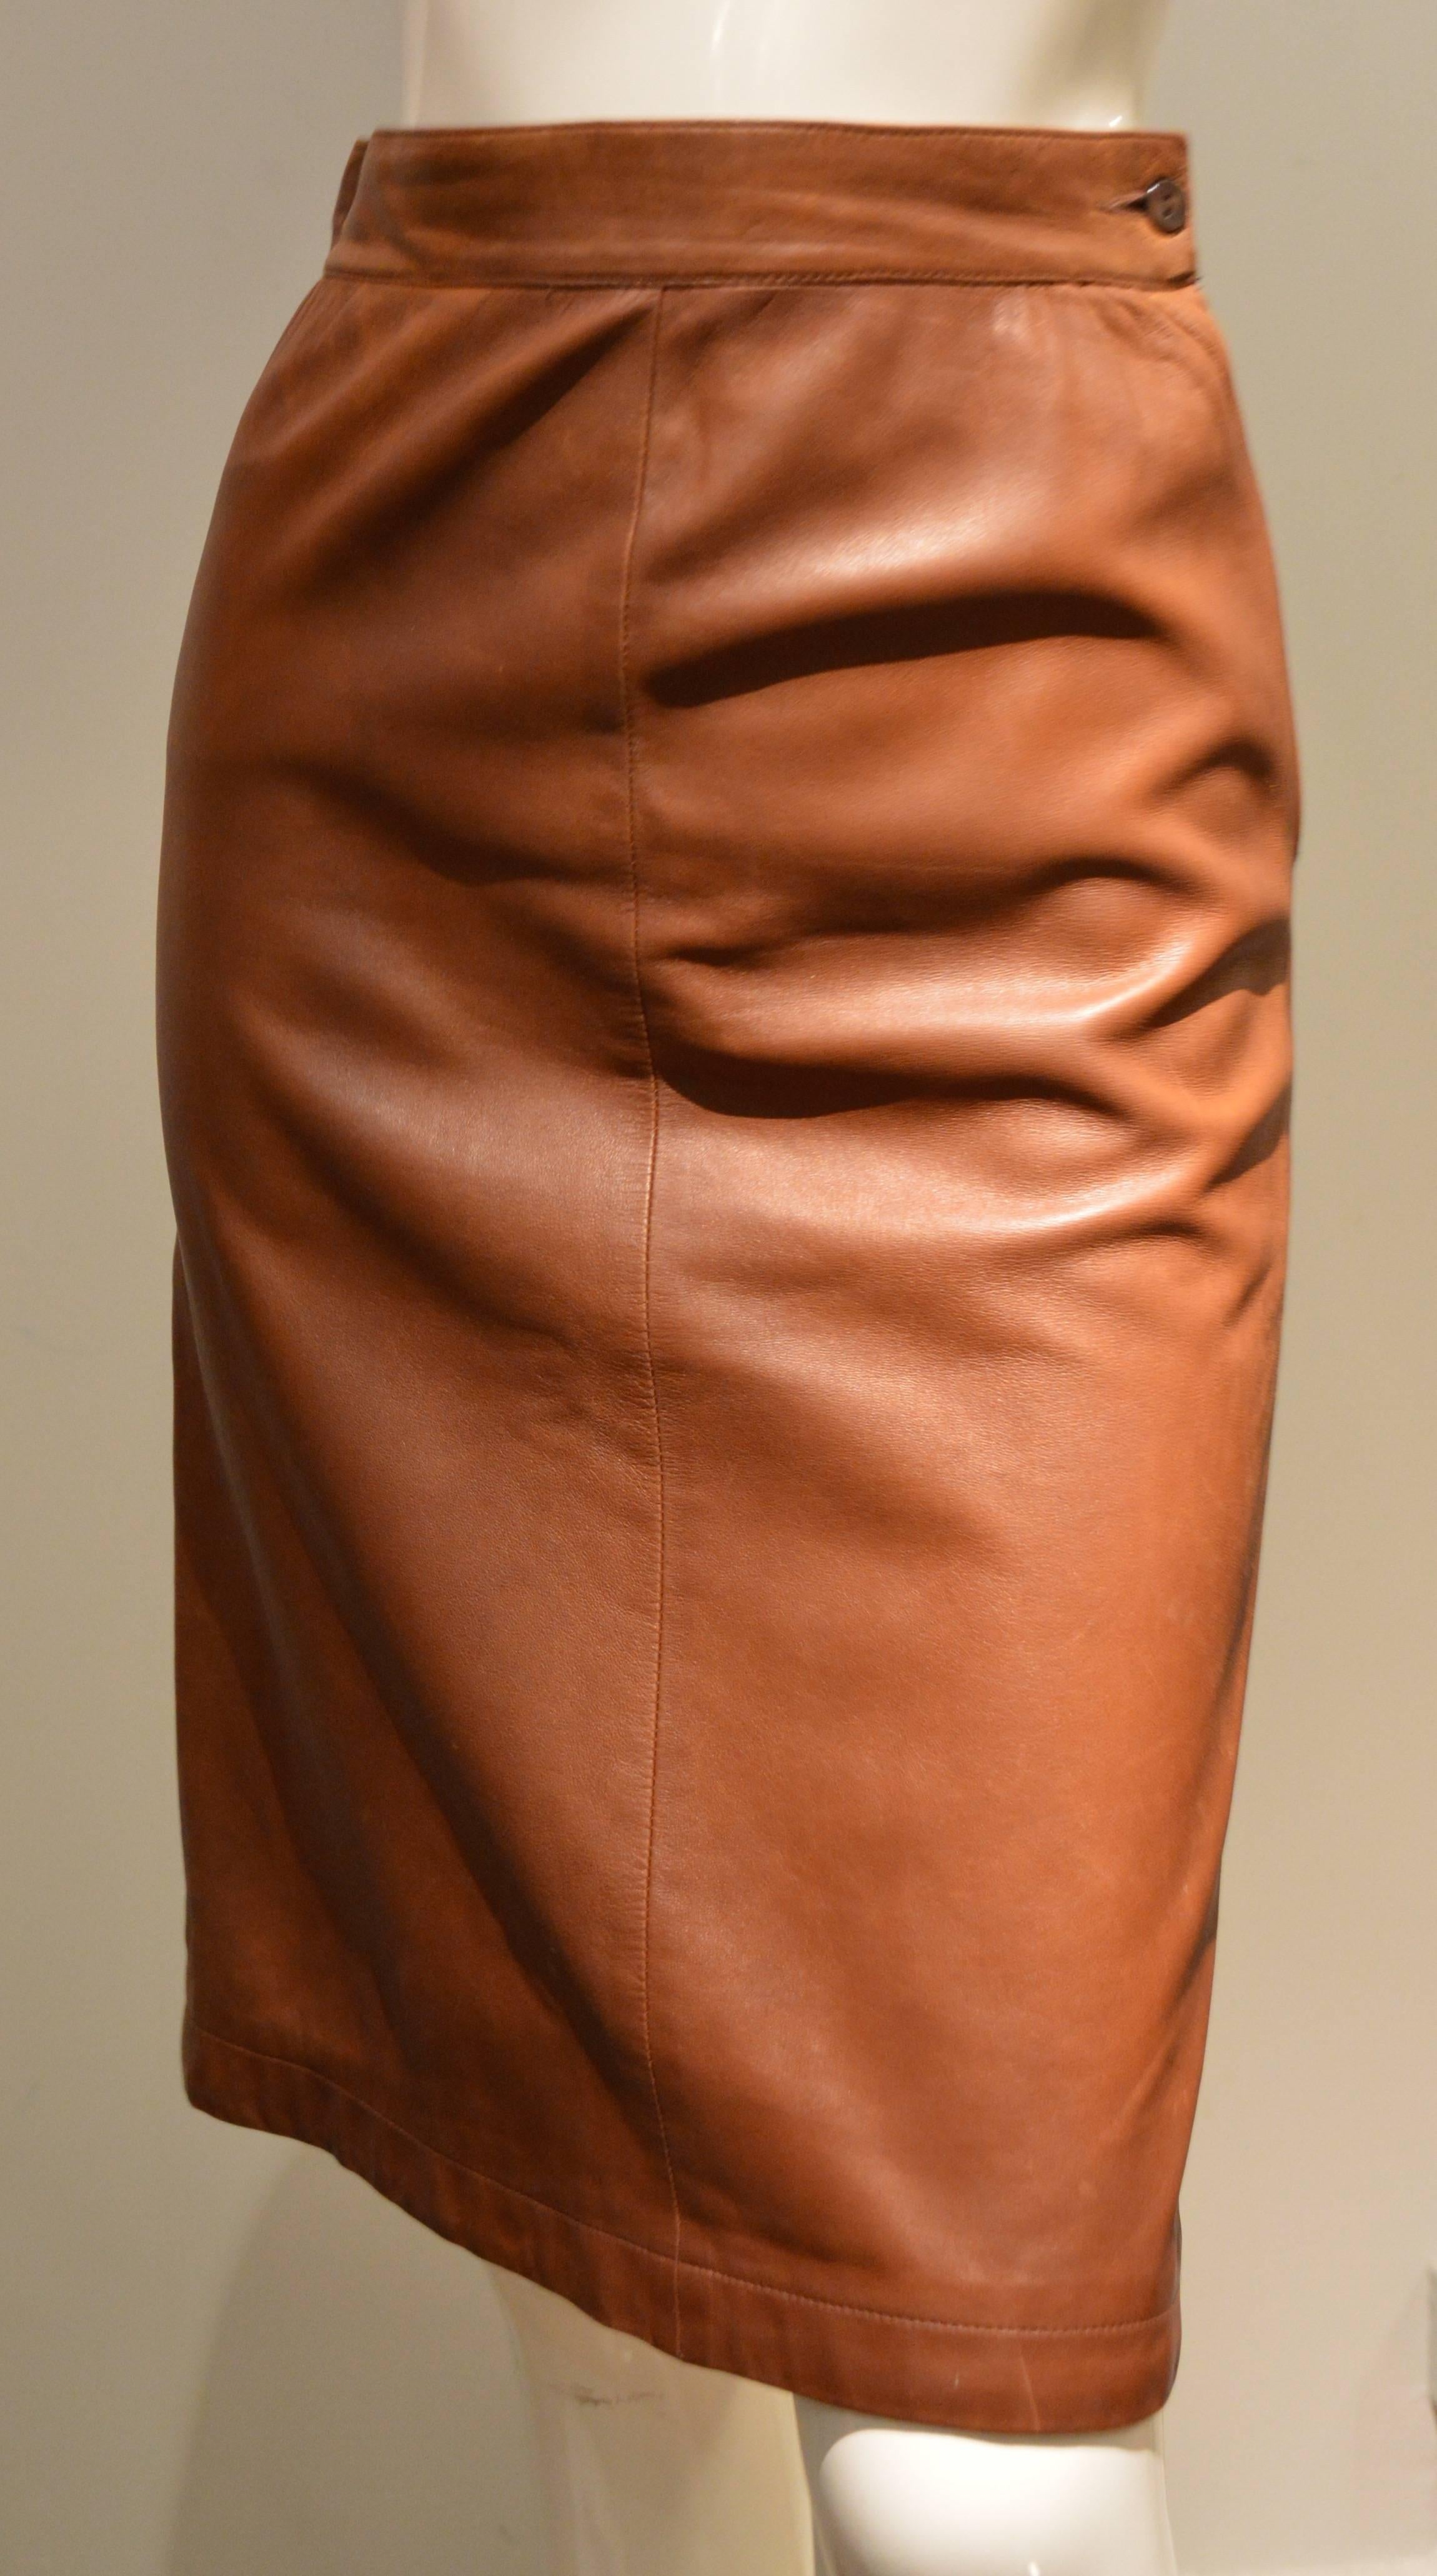 Looking good YSL Rive gauche leather skirt, pencil shape but slightly widen at bottom.
French size 38 which matches a US 6, UK 10 and JAPAN 9.
Measurements :
Waist : 72 cm
Hips : 88 cm
Total Length : 64 cm